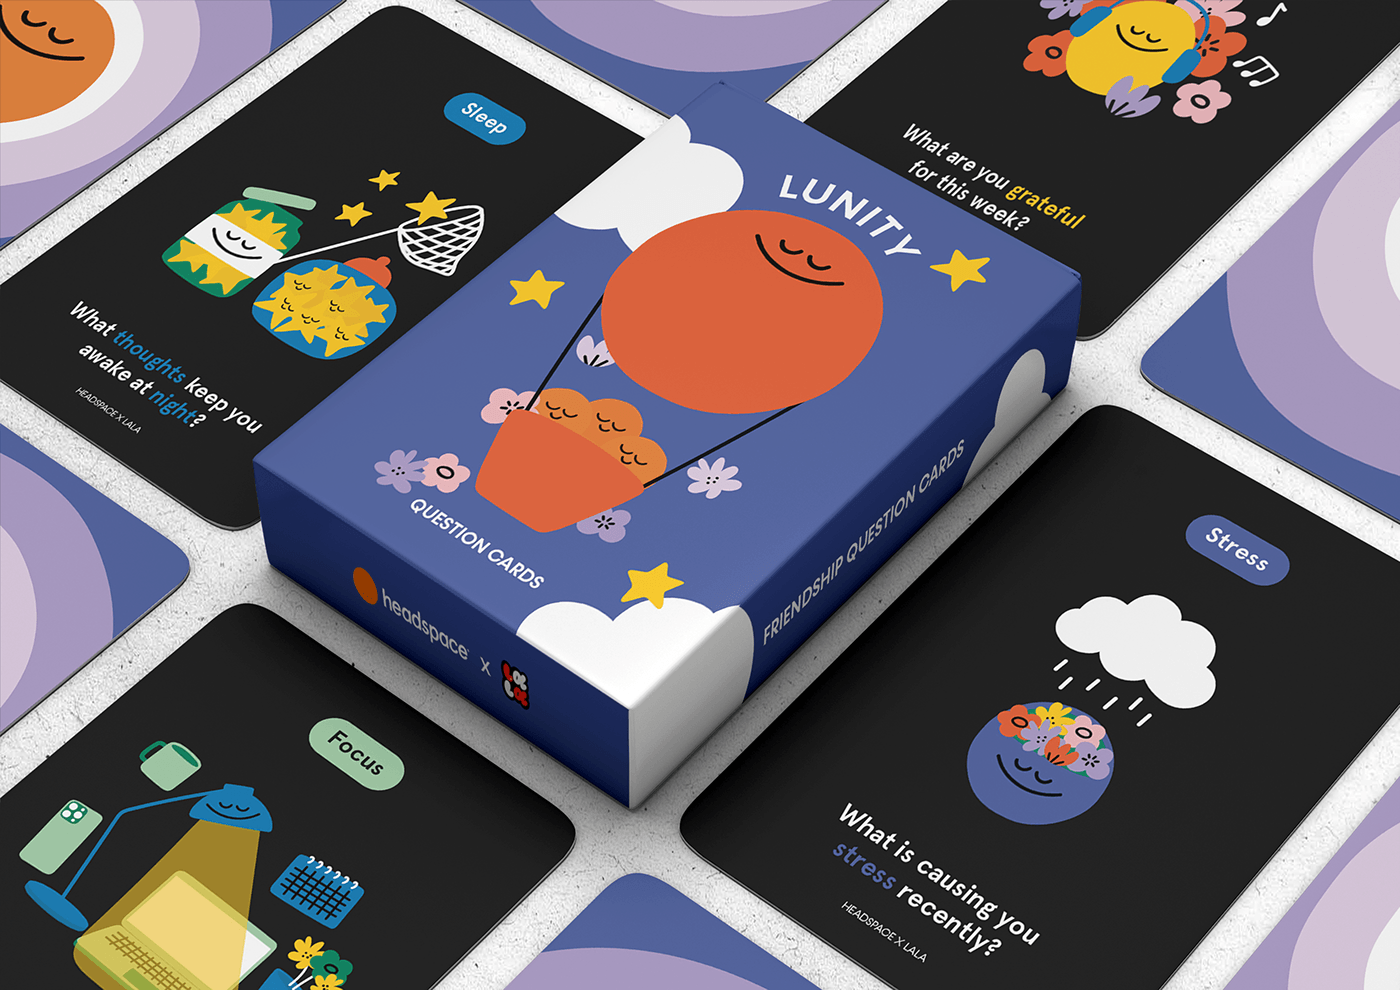 northumbria Packaging cardgame headspace ILLUSTRATION  product design  friendship mindfulness brand identity Fun